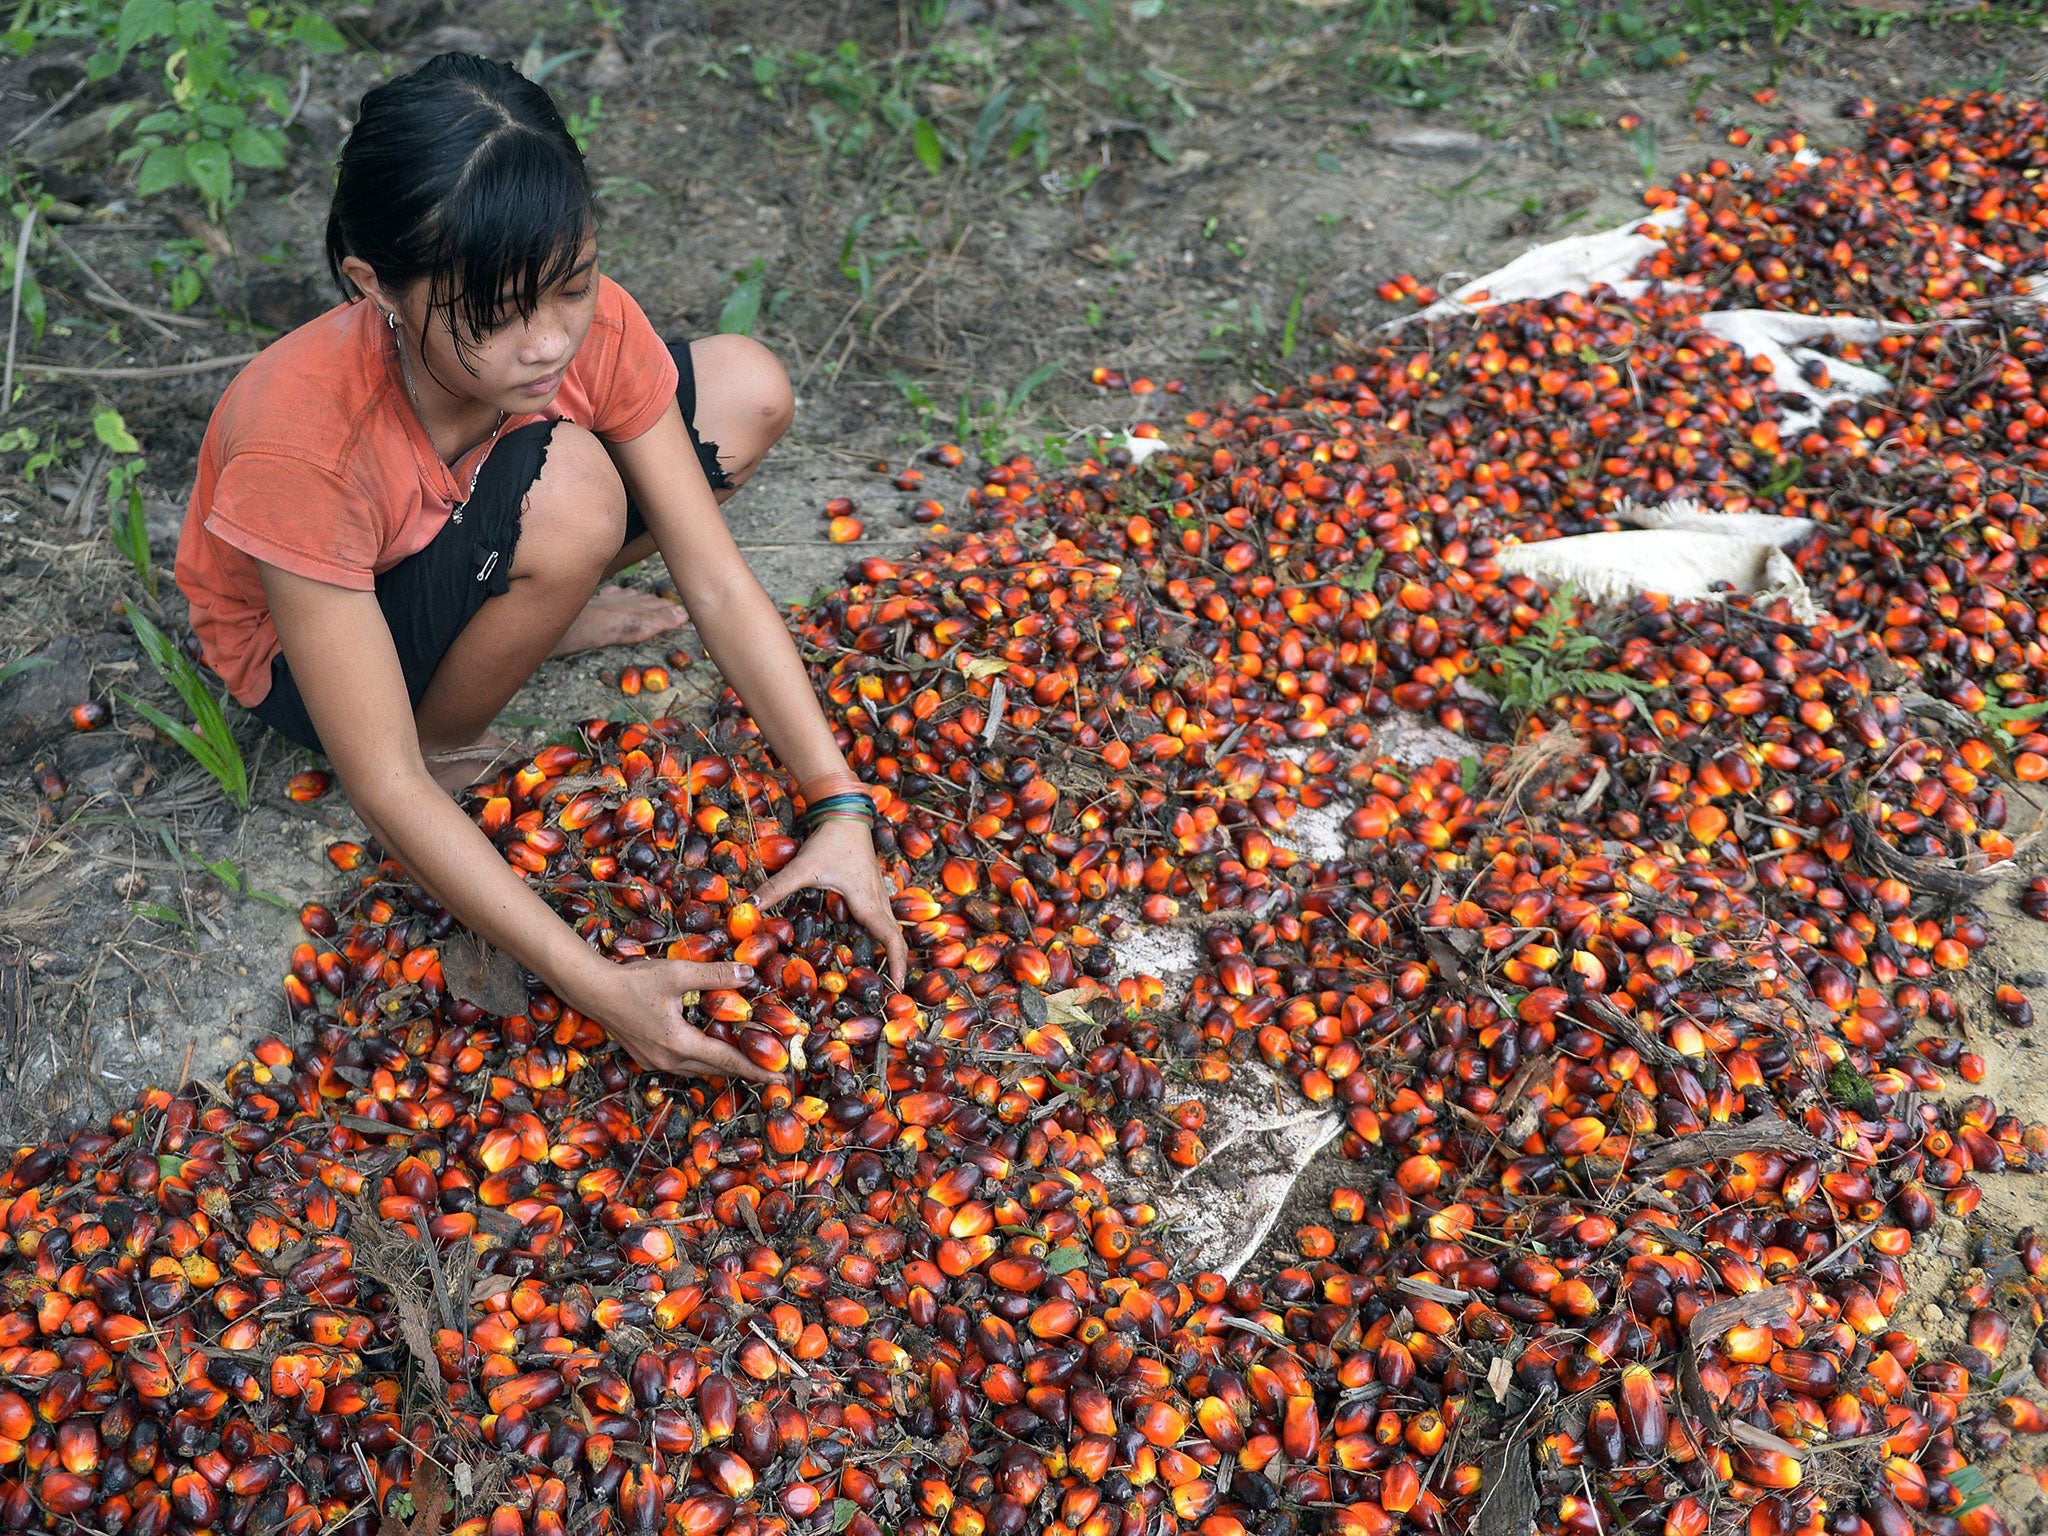 Children in Indonesia work with their families or after school at palm oil plantations